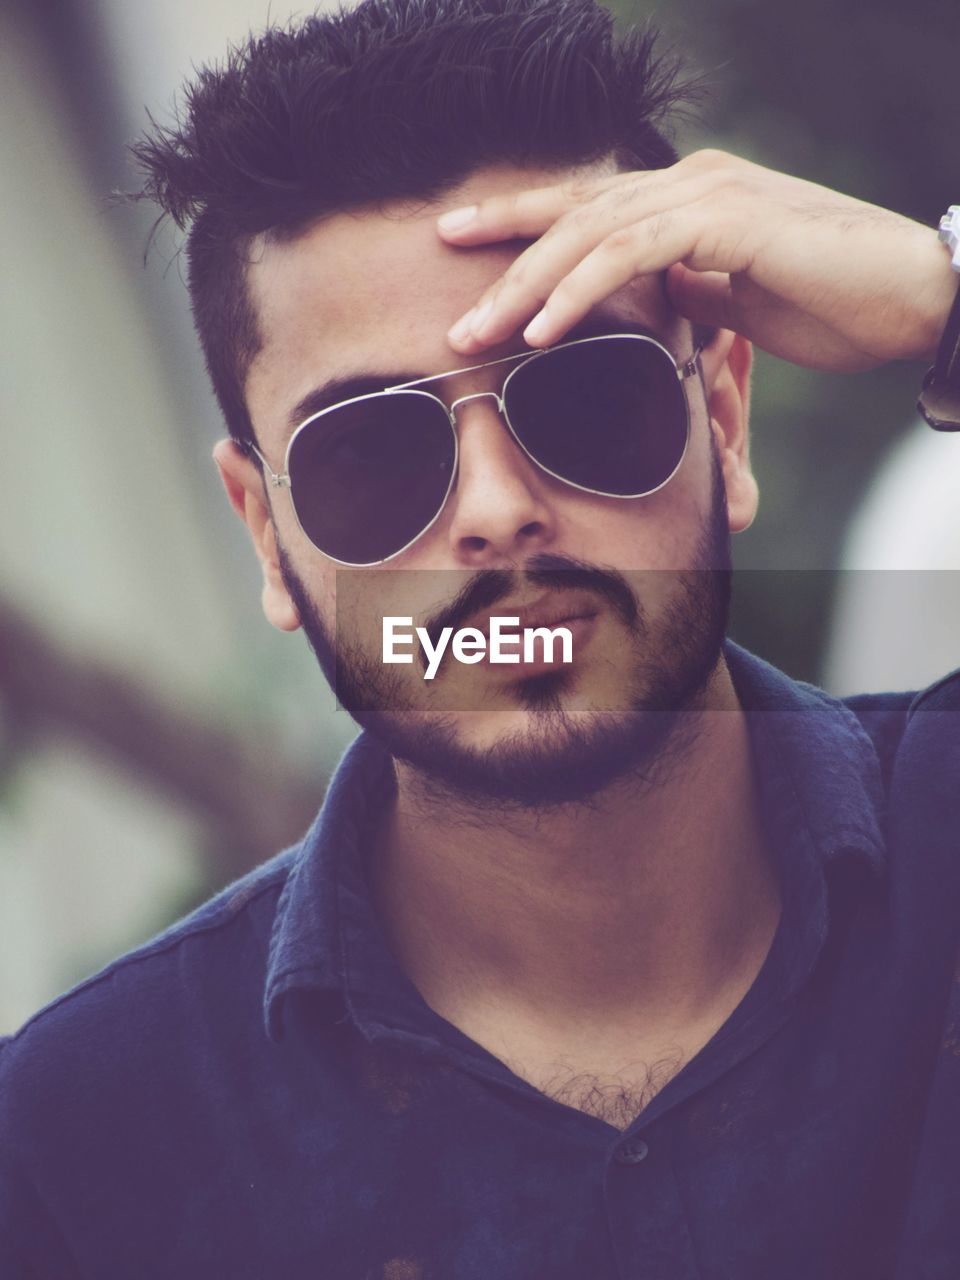 How to style to look more attractive